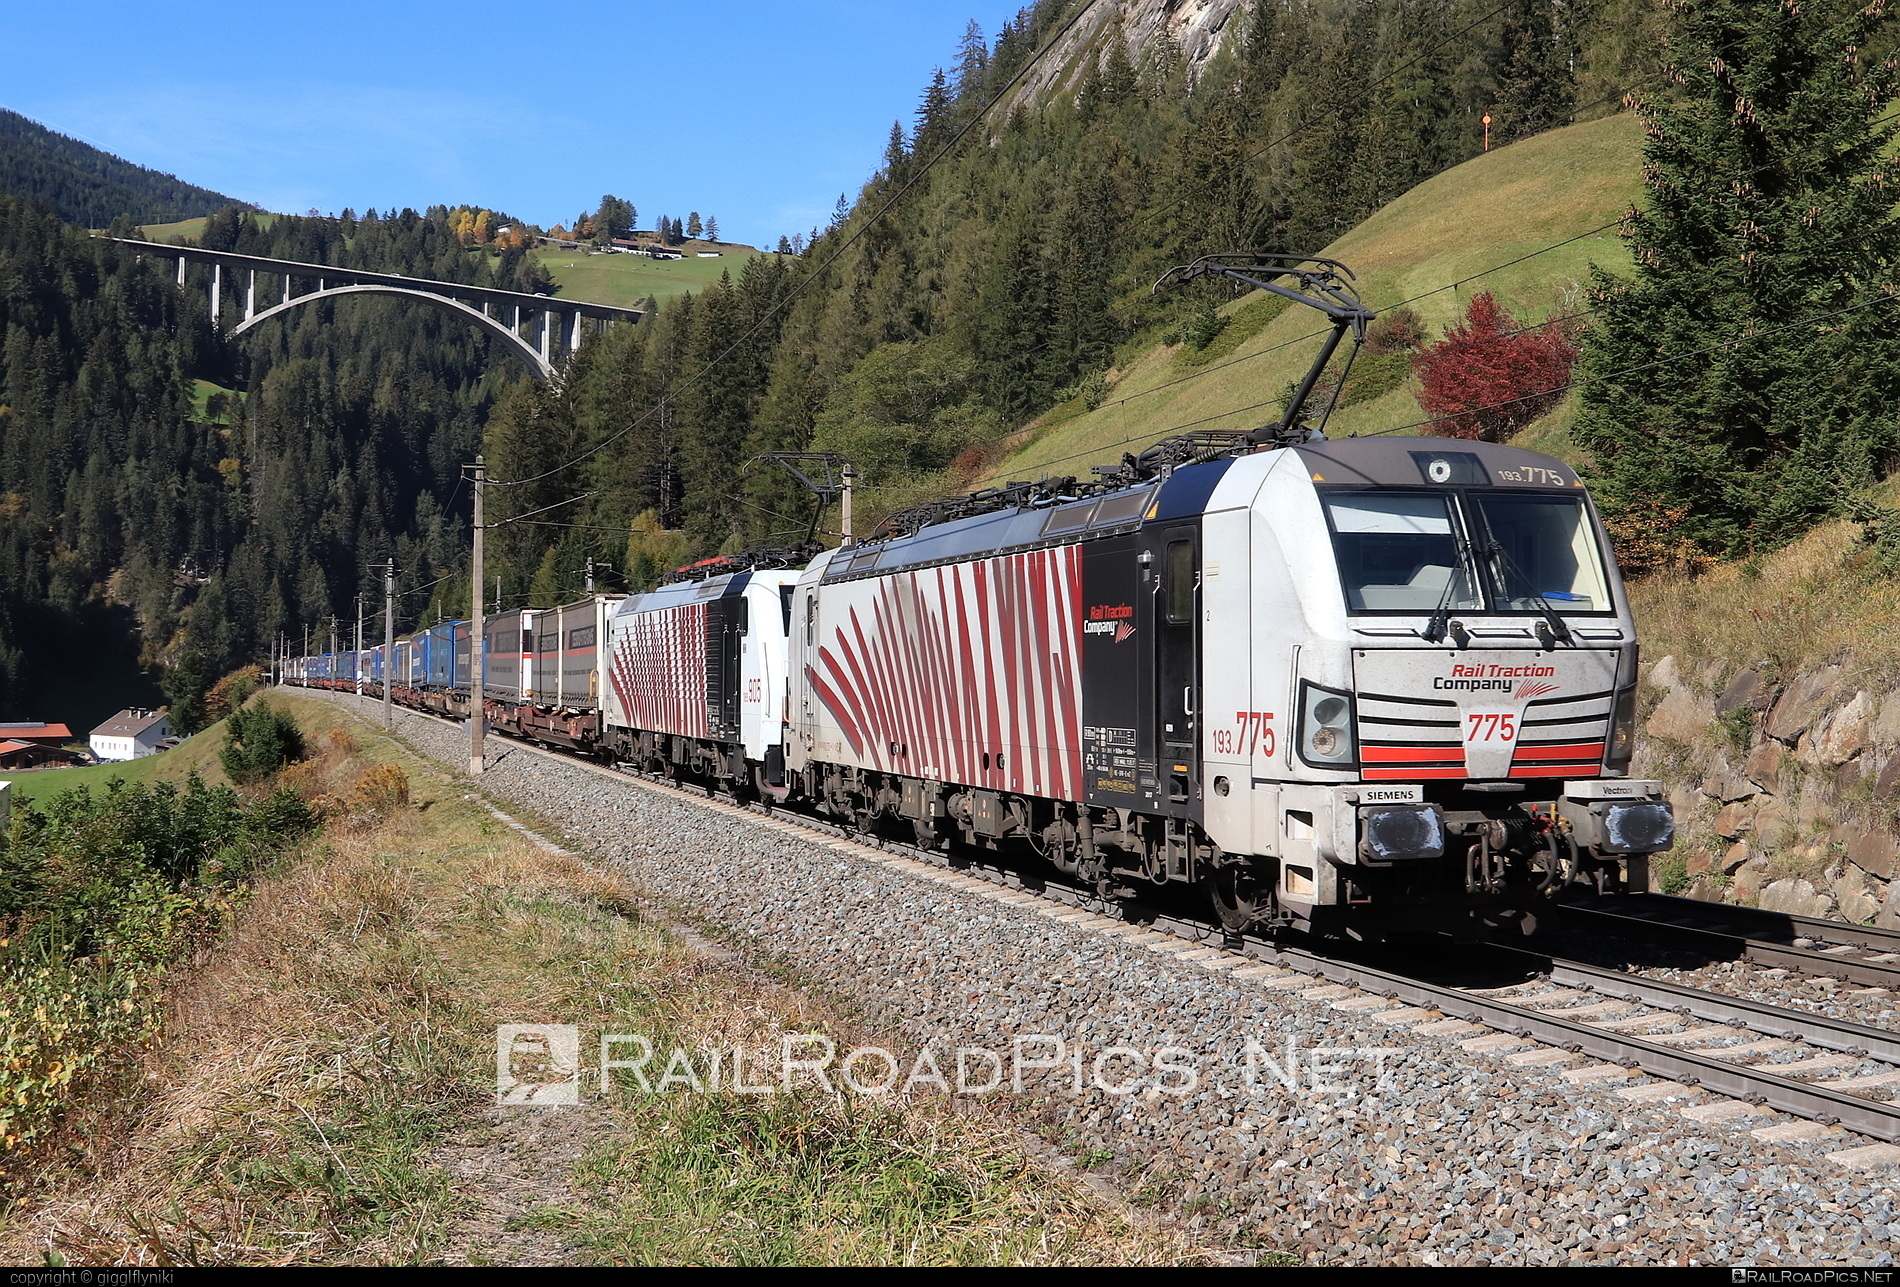 Siemens Vectron MS - 193 775 operated by Rail Traction Company #LokomotionGesellschaftFurSchienentraktion #RailTractionCompany #flatwagon #lokomotion #rtc #semitrailer #siemens #siemensVectron #siemensVectronMS #vectron #vectronMS